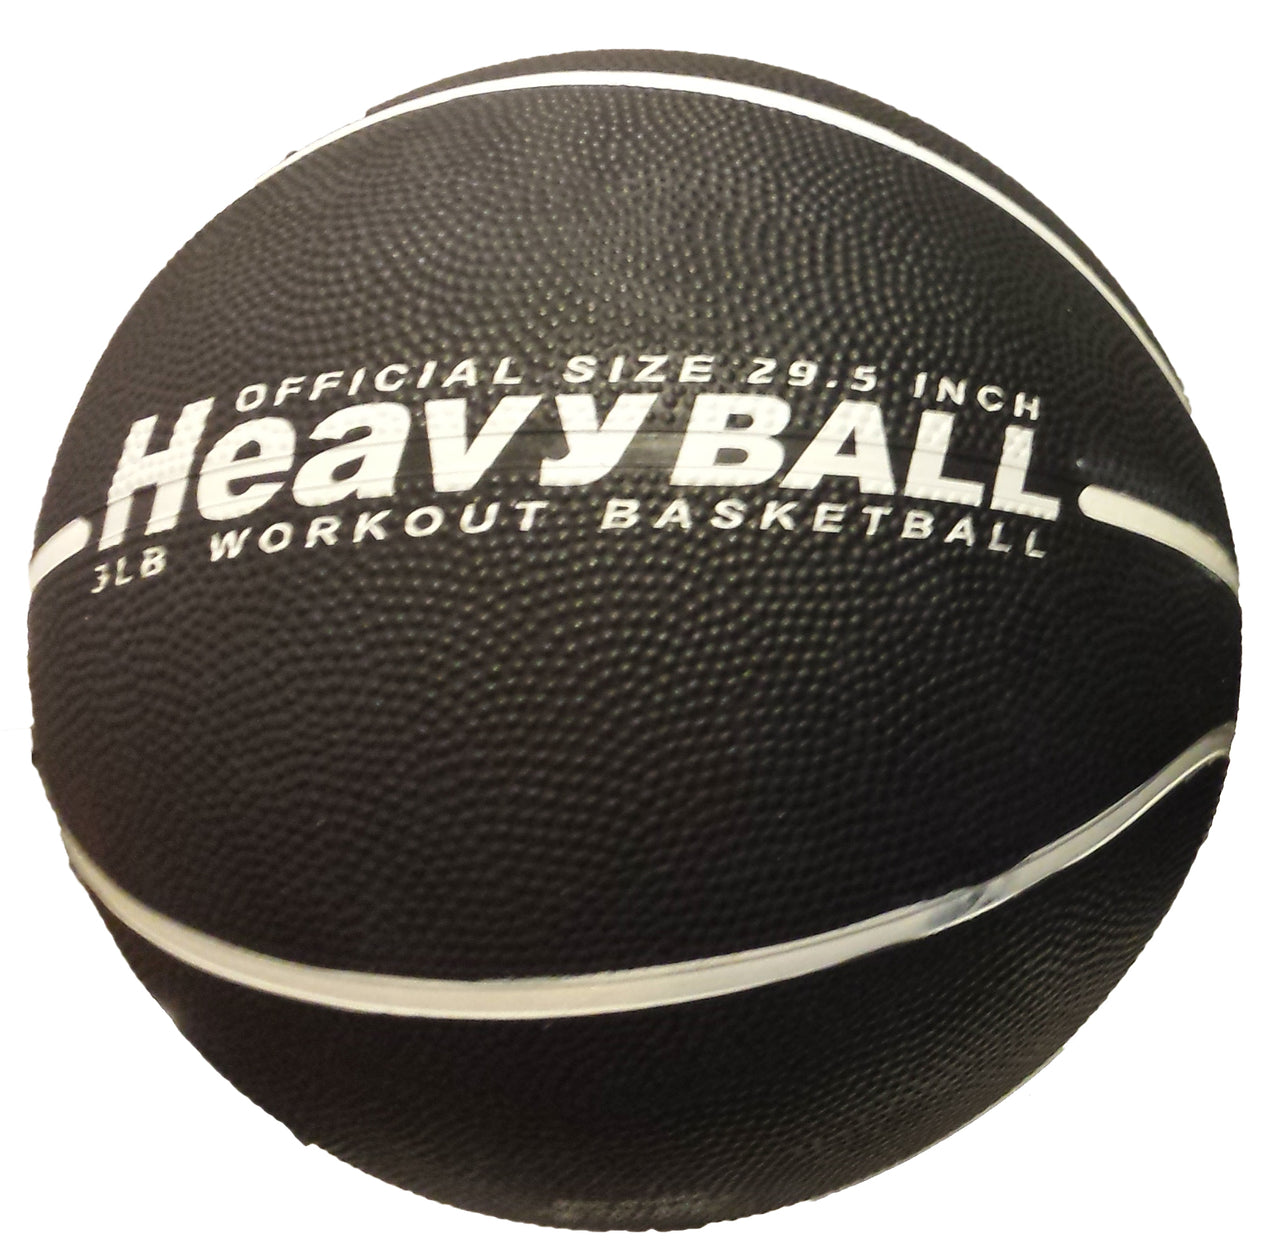 Weighted Basketball HeavyTrainer (3 or 2.75 lbs)